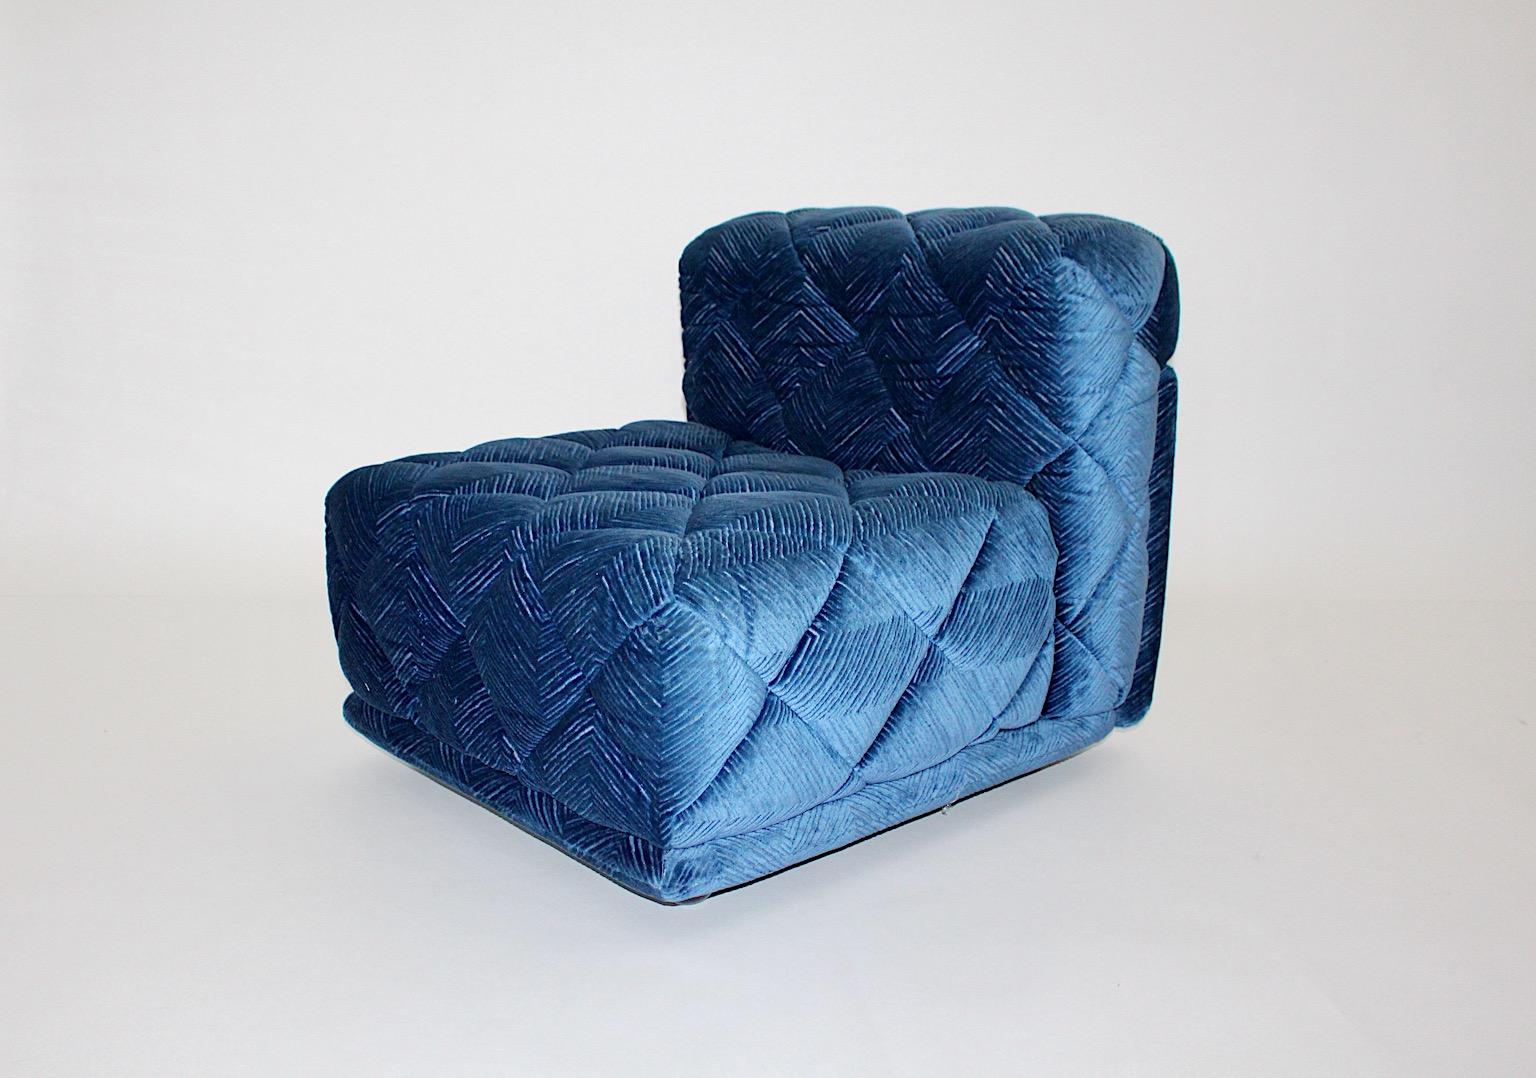 Space Age vintage modular element or sofa or lounge chair model Rhombos from stitched velvet fabric in blue color by Wittmann 1970s Austria.
A wonderful modular sofa element or lounge chair covered with stitched velvet fabric in amazing sea blue or